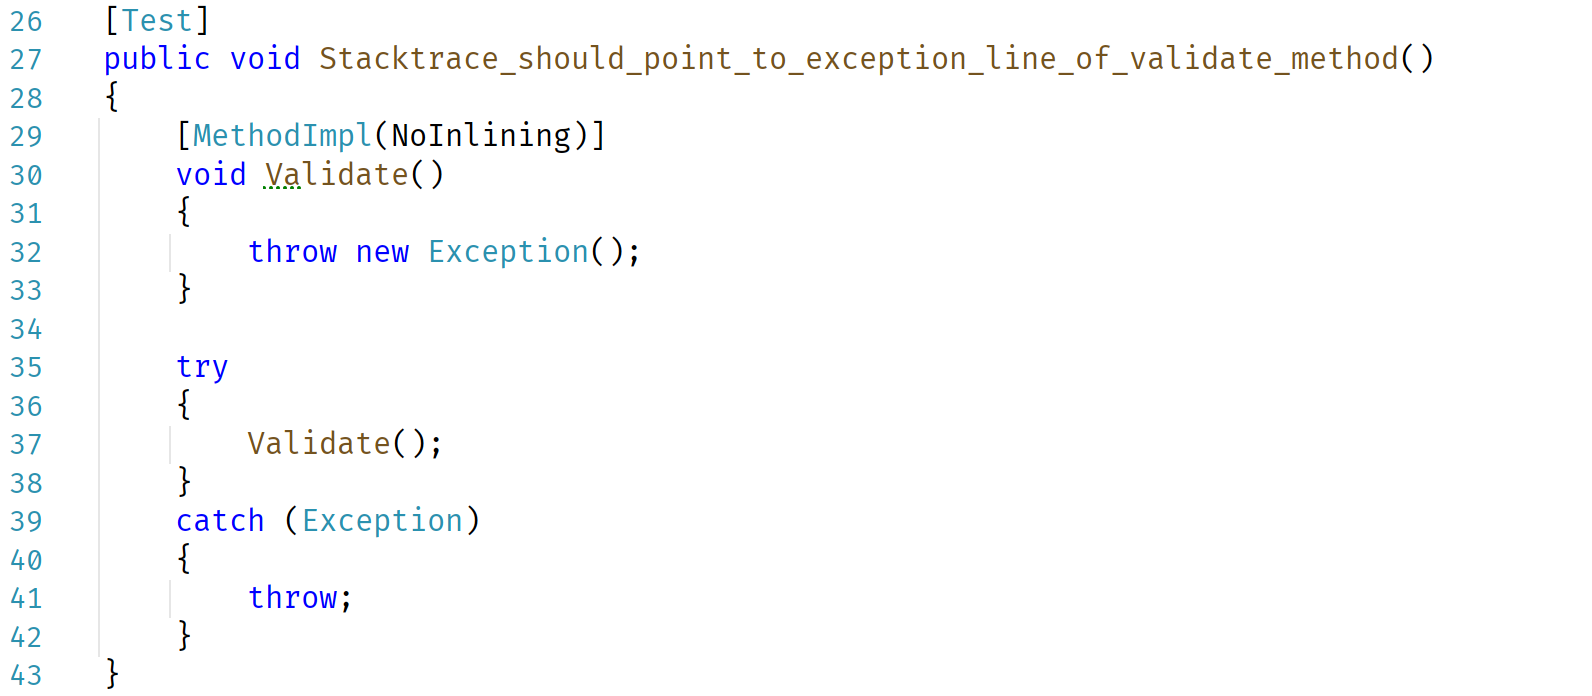 Stacktrace should point to exception line of validate method